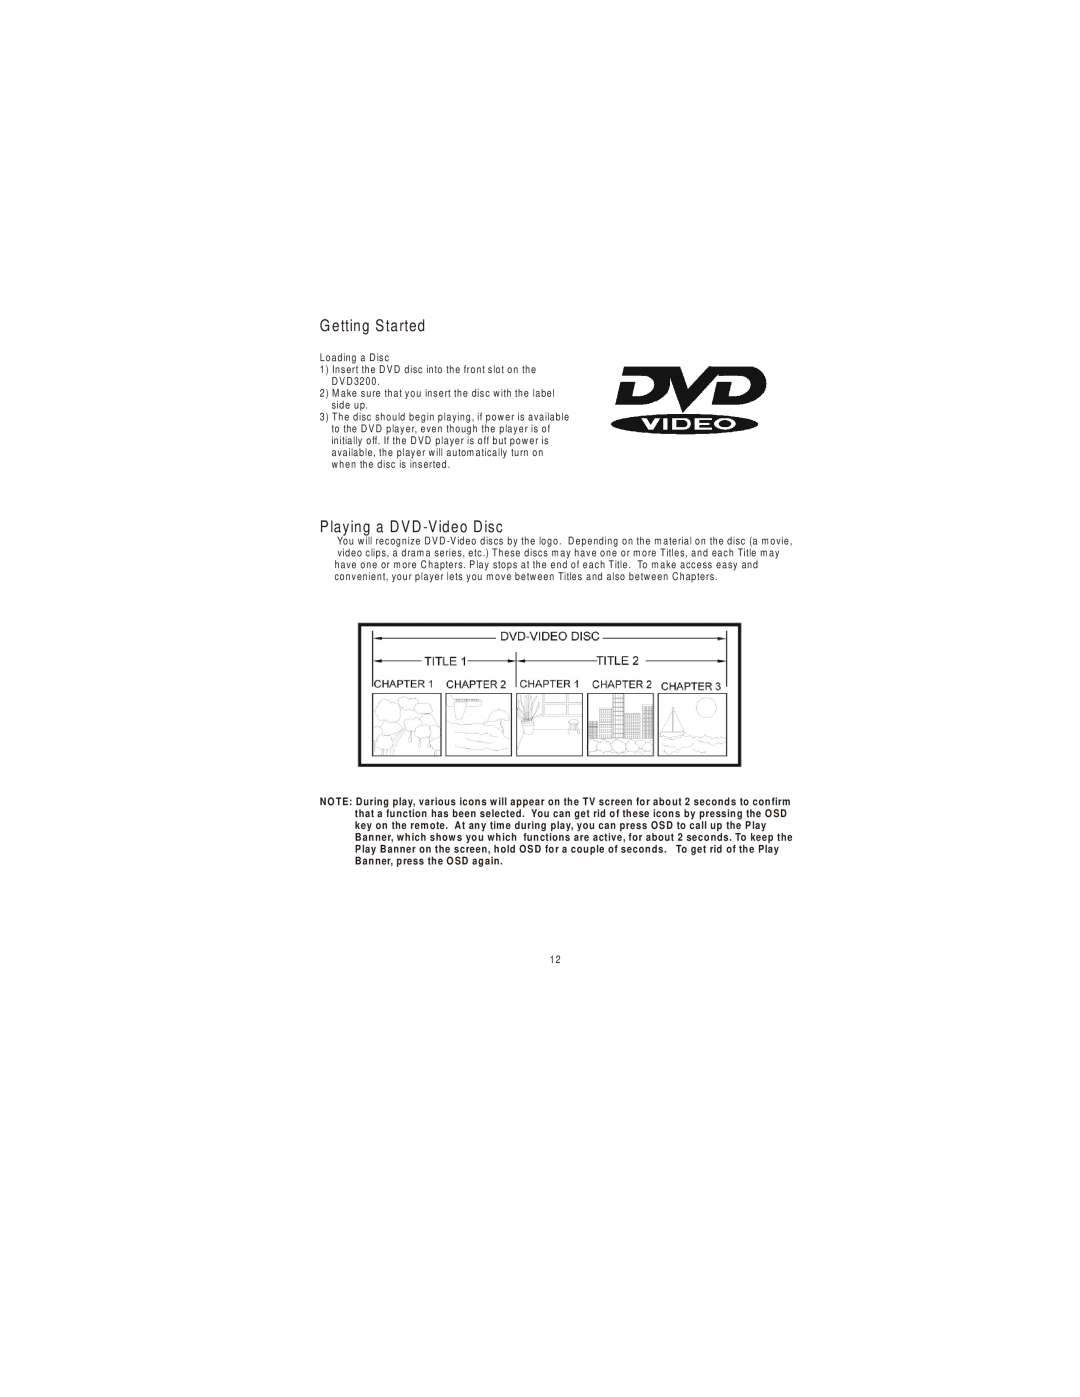 Audiovox 3200 owner manual G etting Started, Playing a DVD -Video Disc 